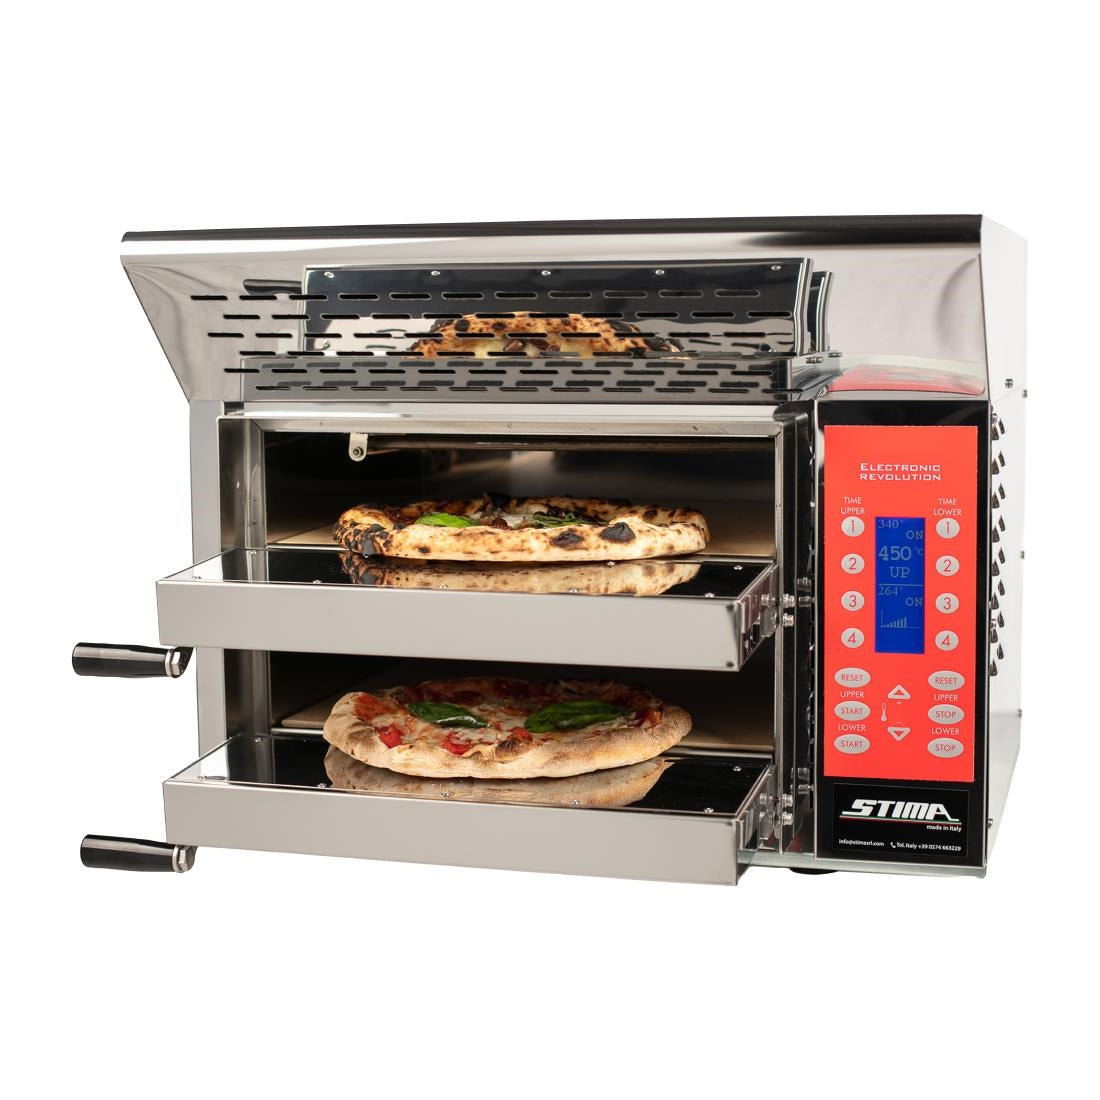 CU073 Stima VP2 Fast Cook Pizza Oven JD Catering Equipment Solutions Ltd